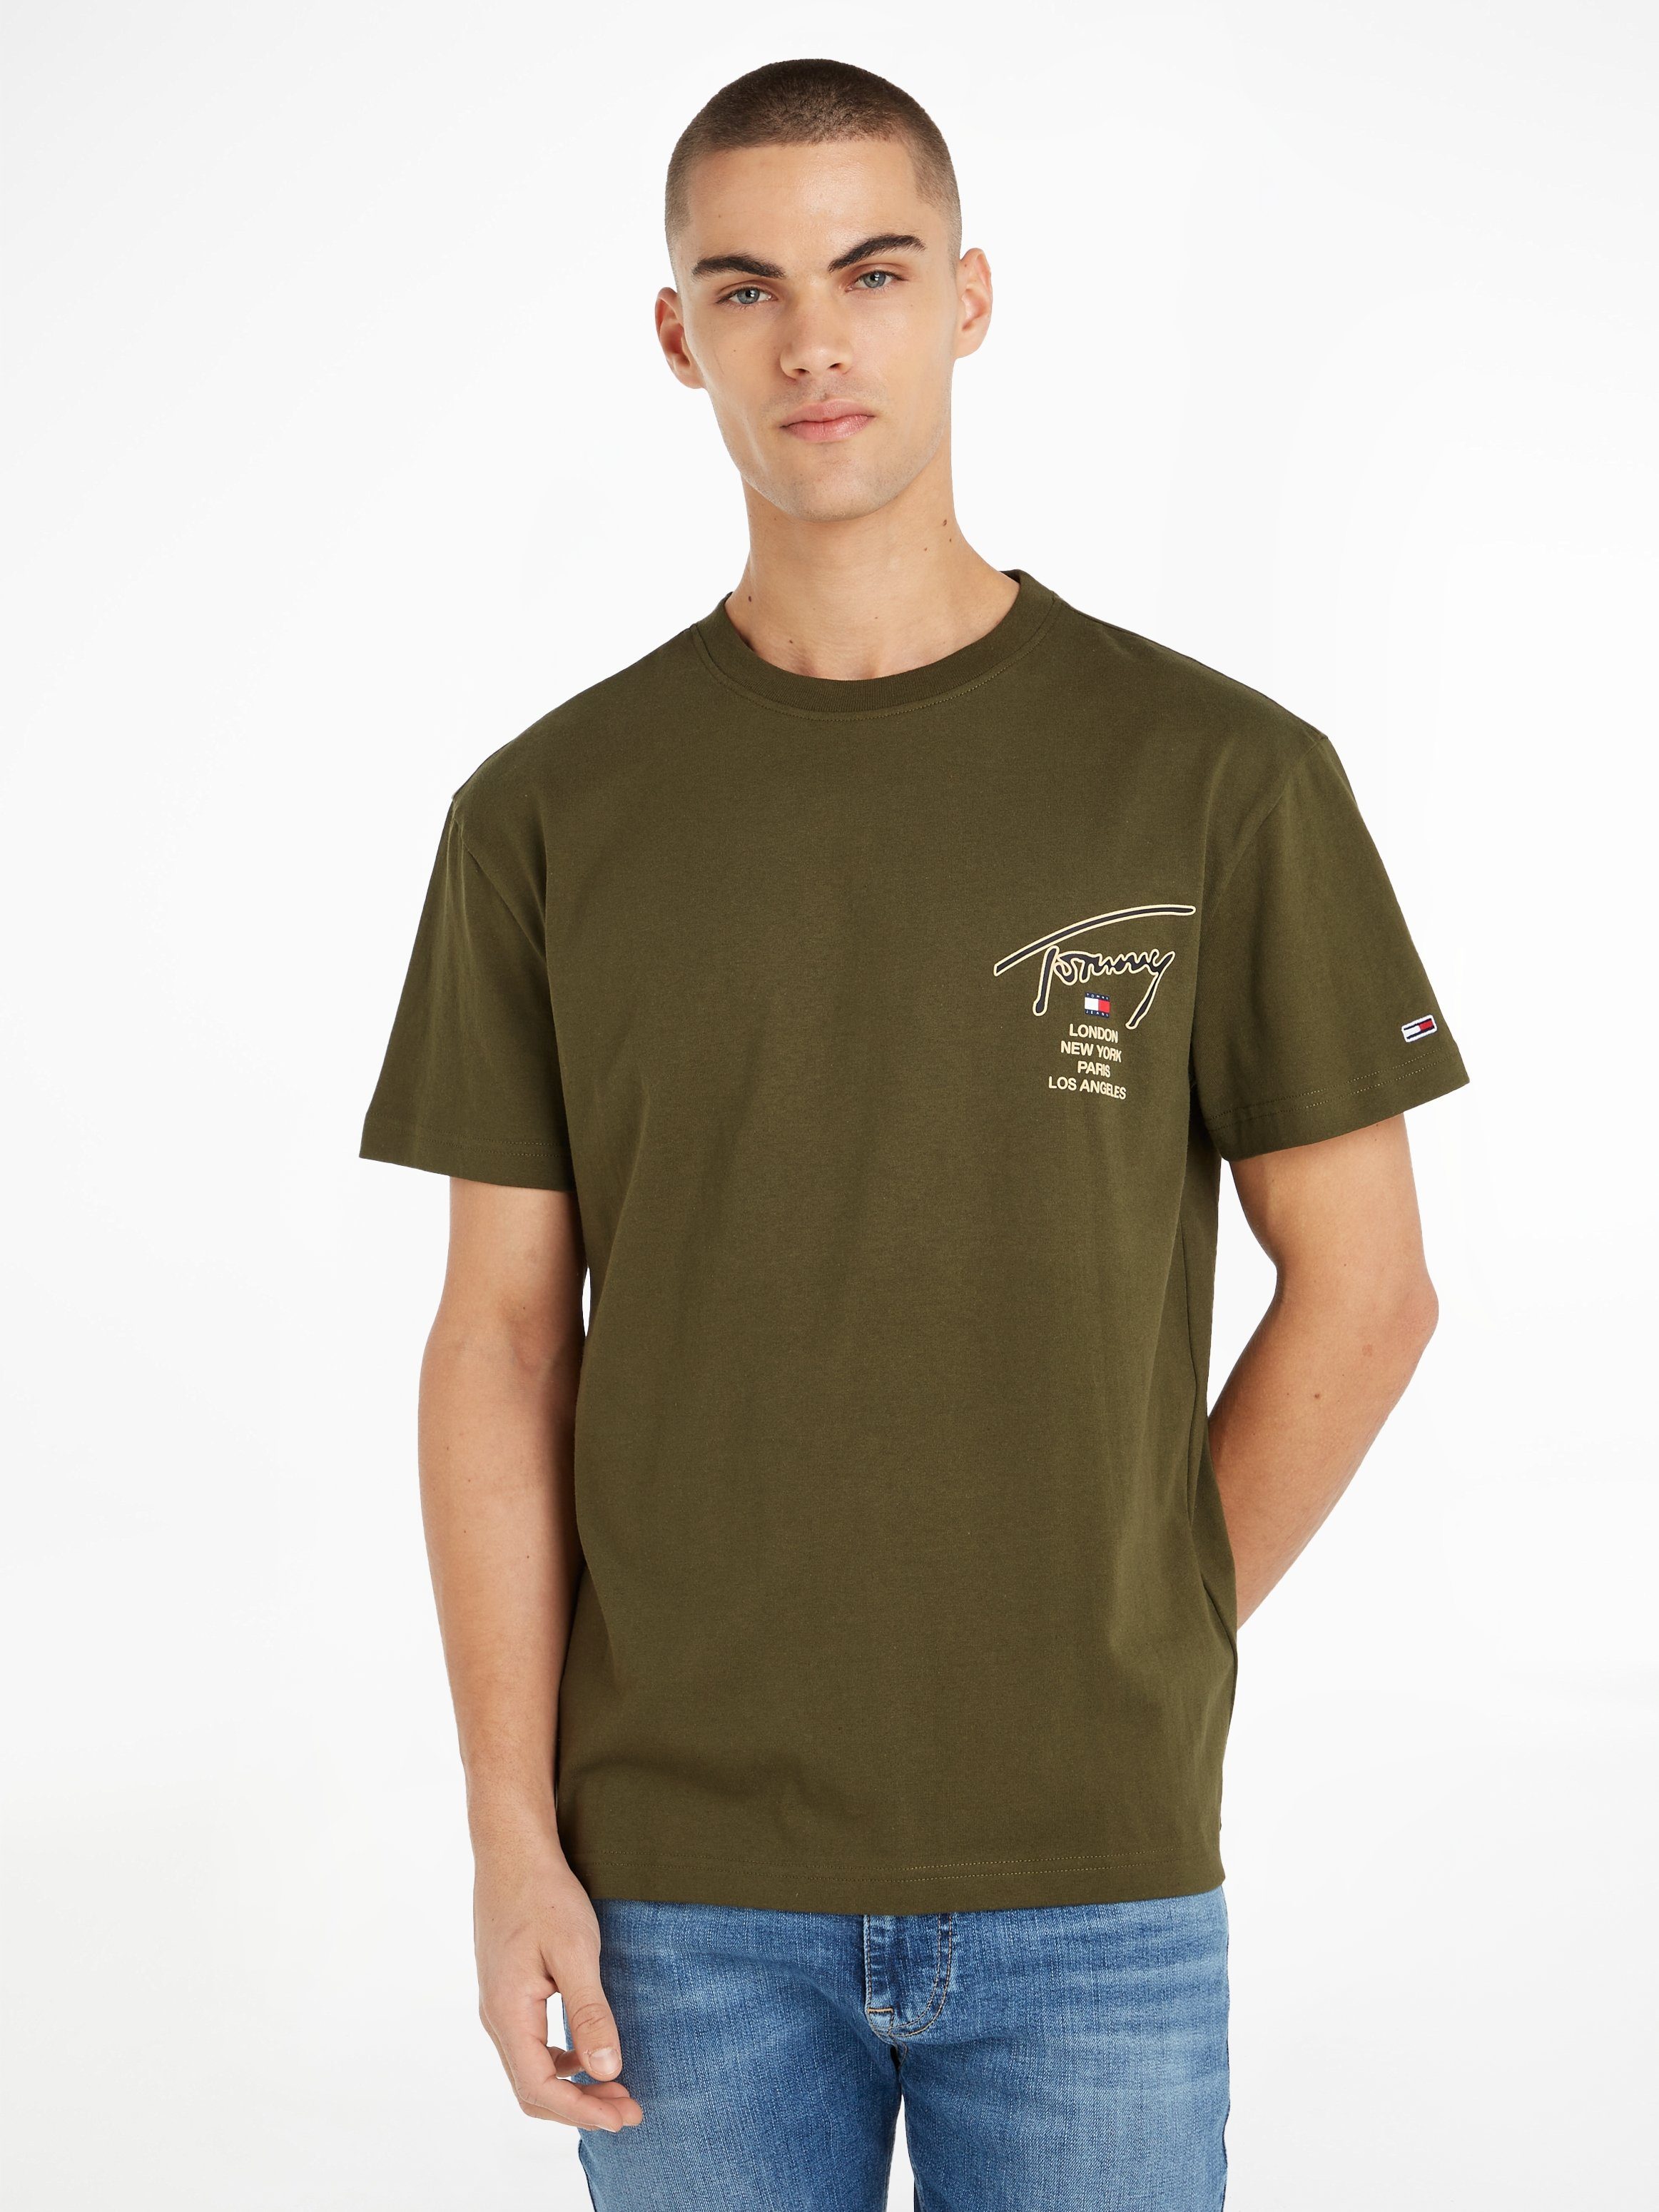 Tommy Jeans T-Shirt TJM CLSC GOLD SIGNATURE BACK TEE Drab Olive Green